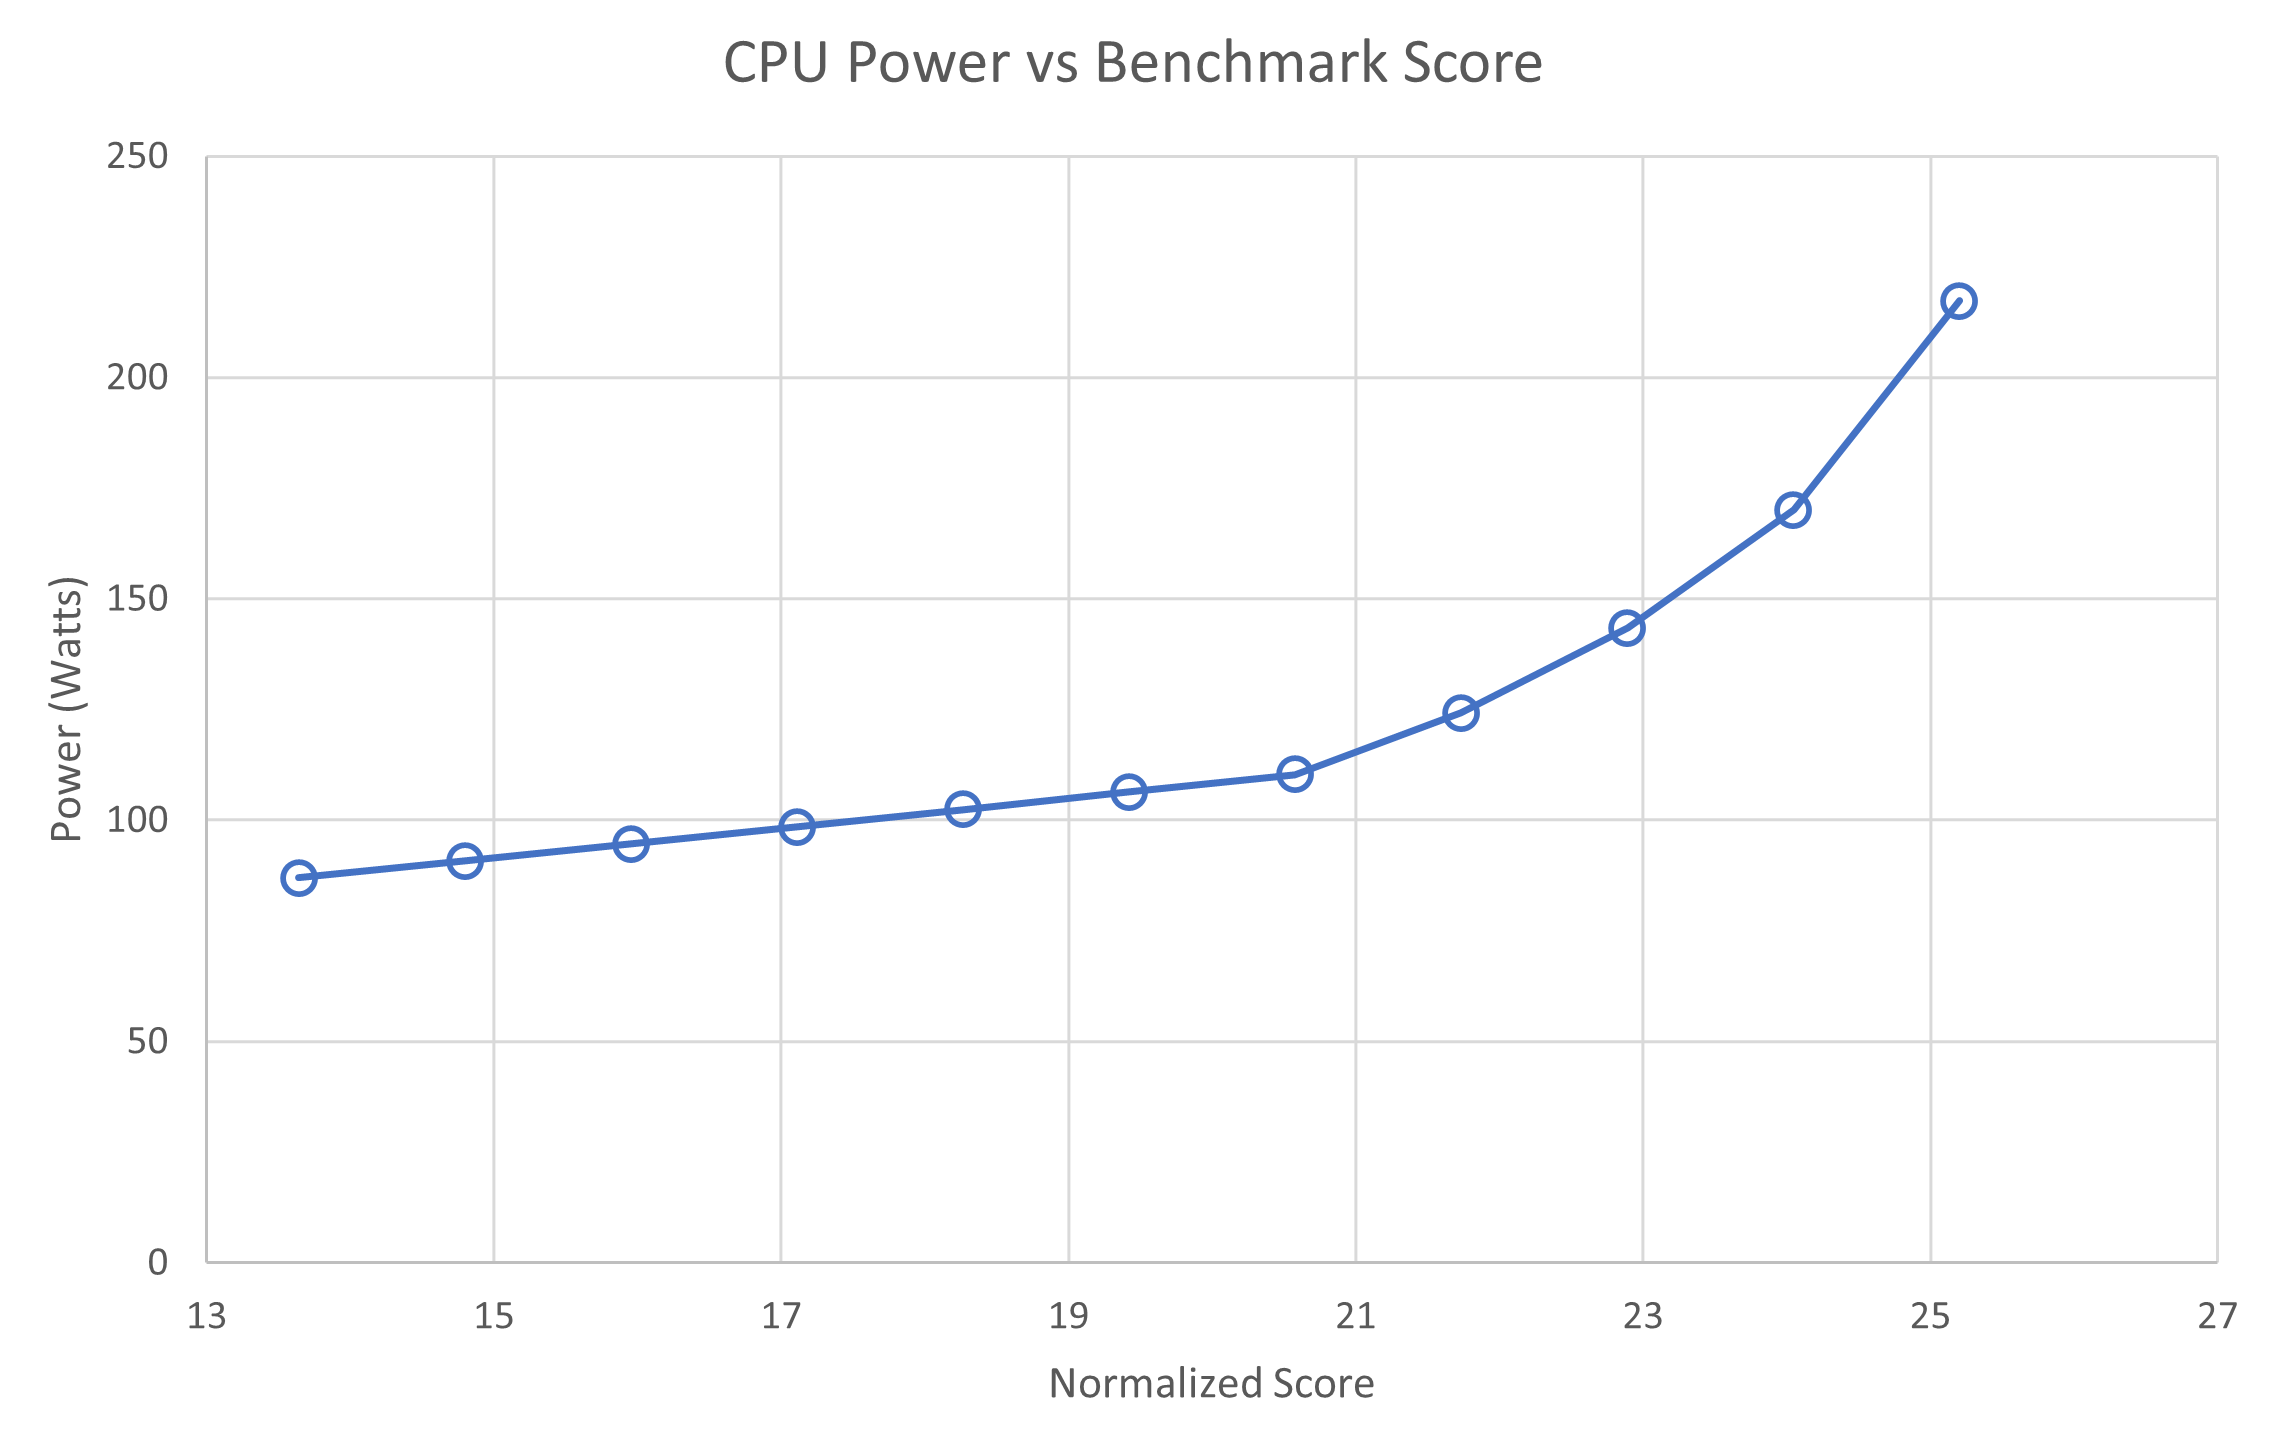 A line chart of Power compared to Integer speed showing that as speed increases, the power goes up, linearly at first, then exponentially.